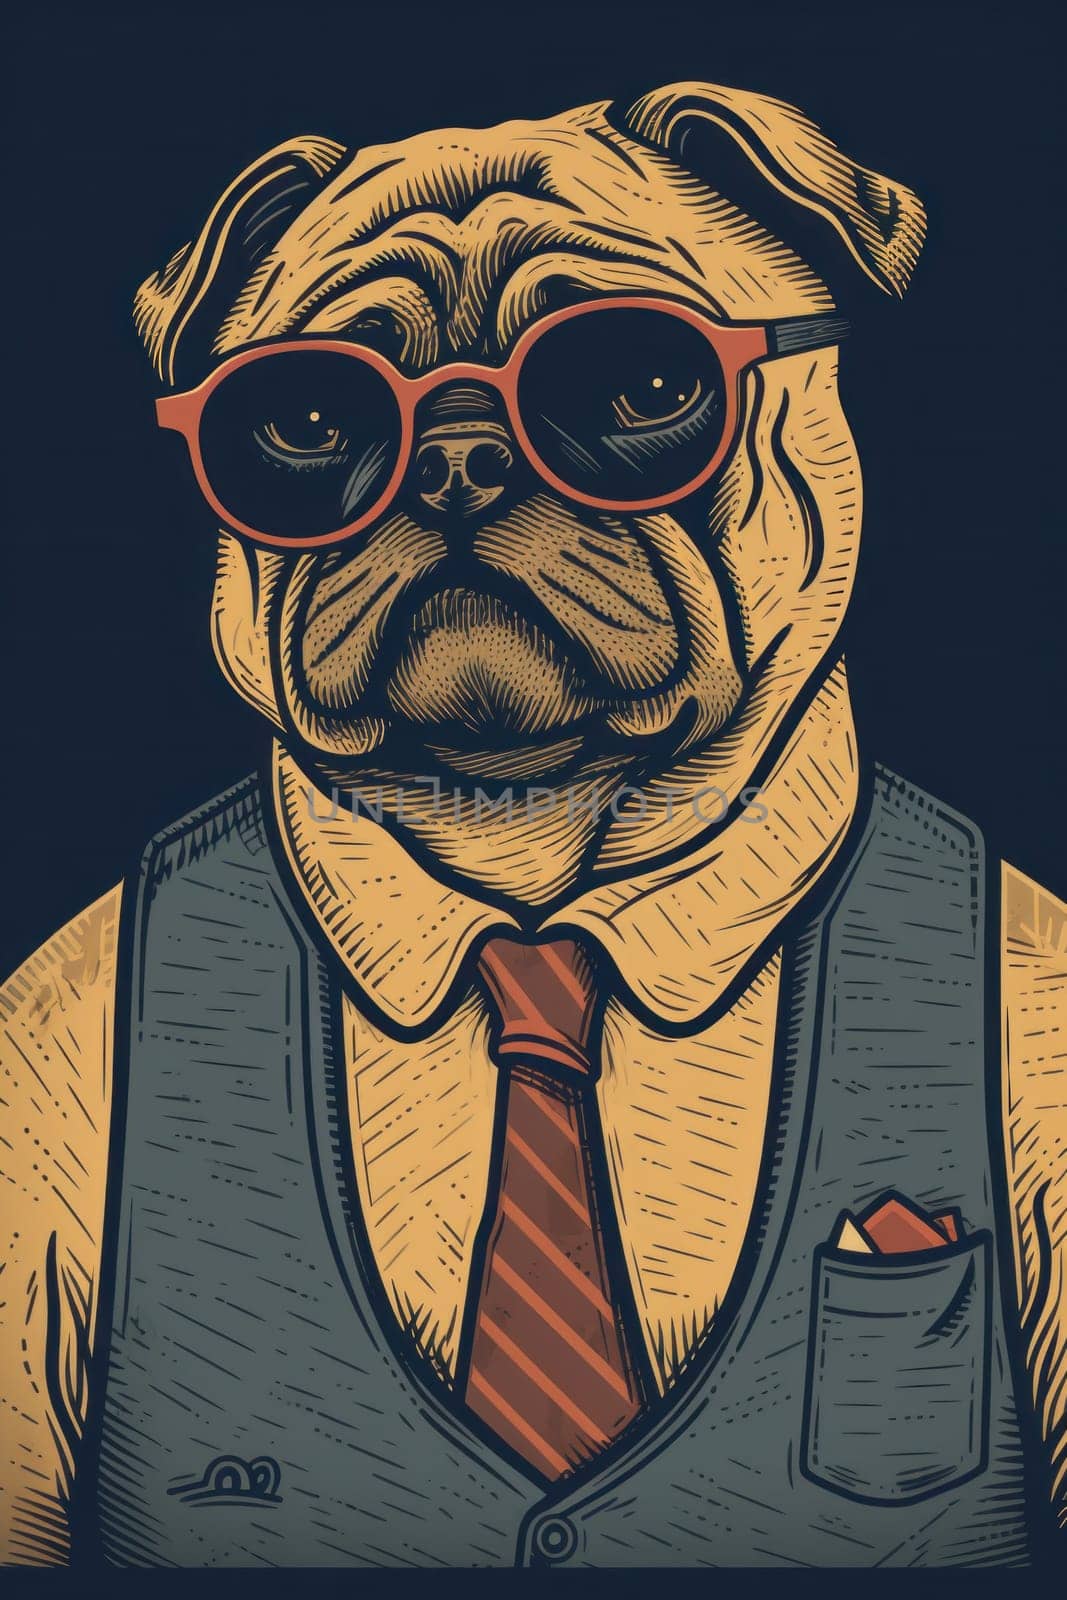 A pug wearing glasses and a tie, AI by starush